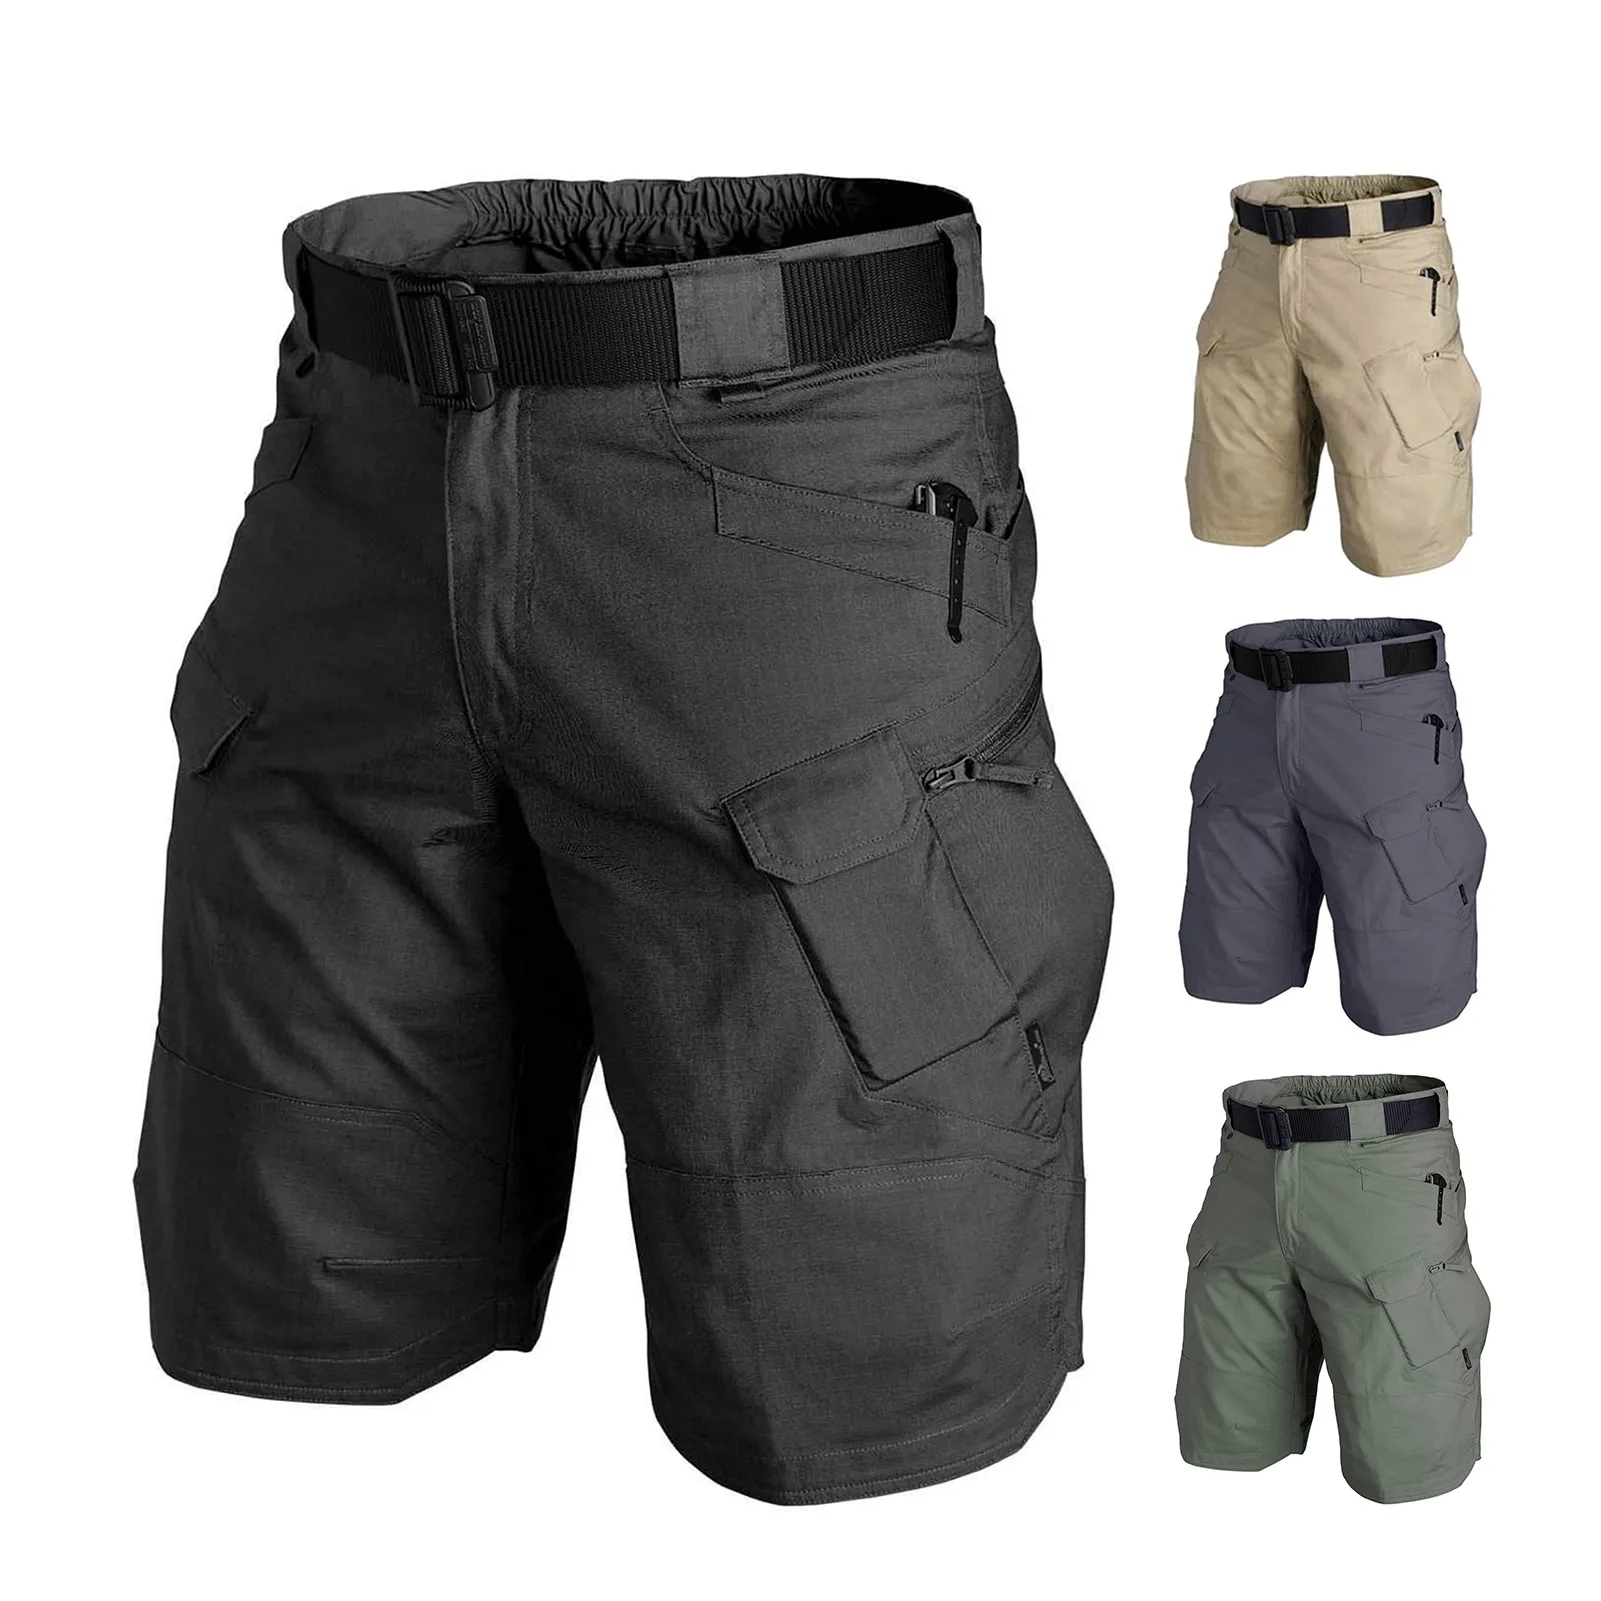 Male Tactical Short Military Waterproof Workwear Pants Shorts Outdoor Cycling Sports Shorts Summer Quick-Drying Leisure Shorts